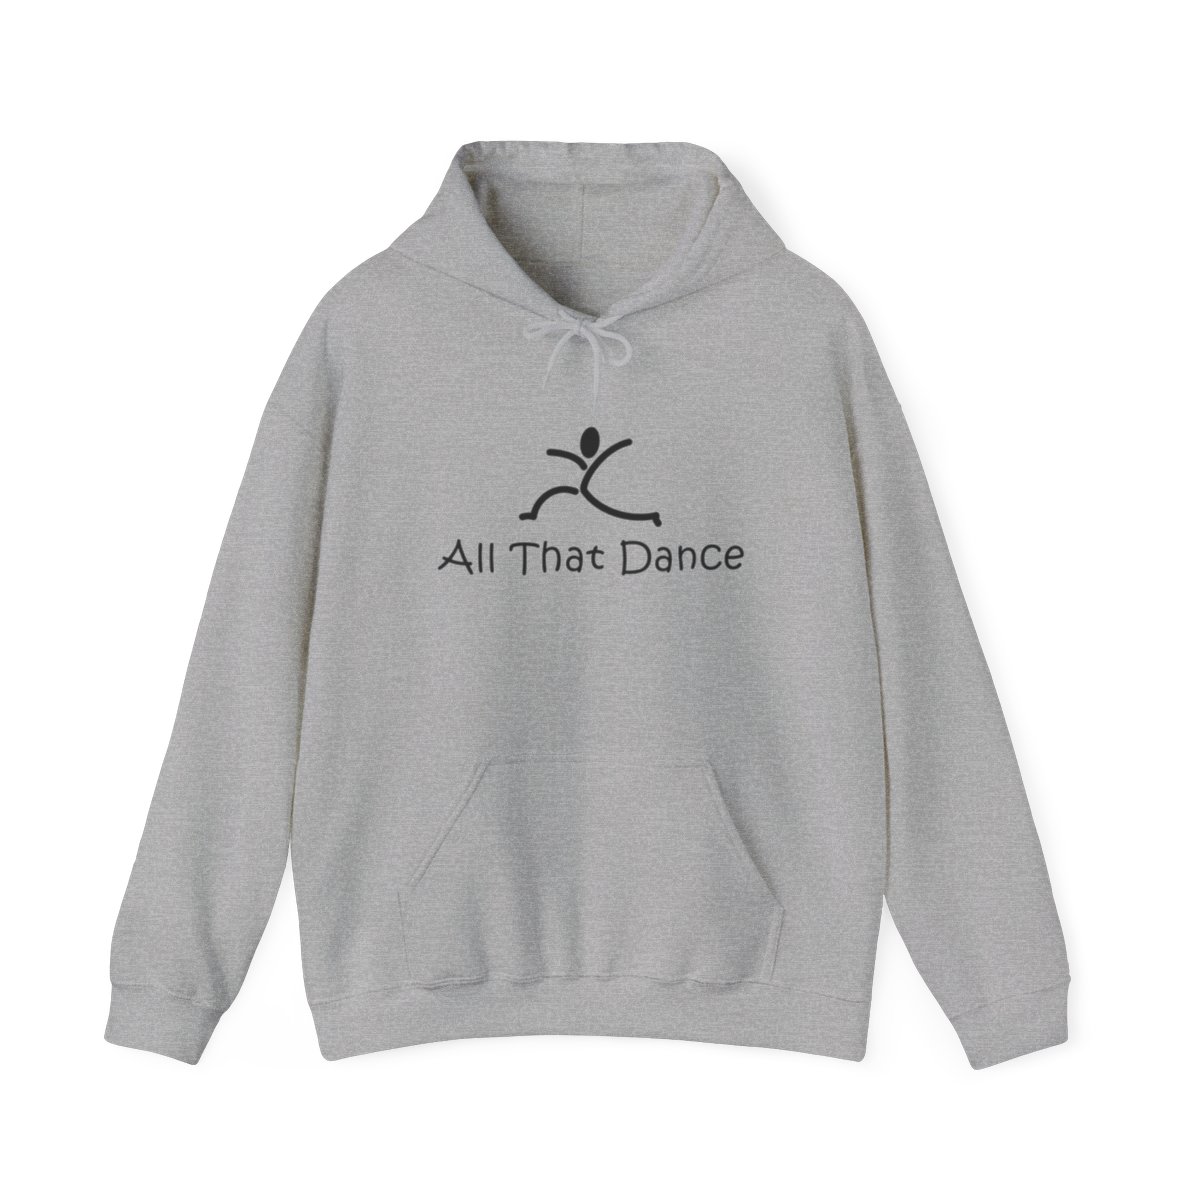 ADULT SIZES - All That Dance Hoodies product thumbnail image